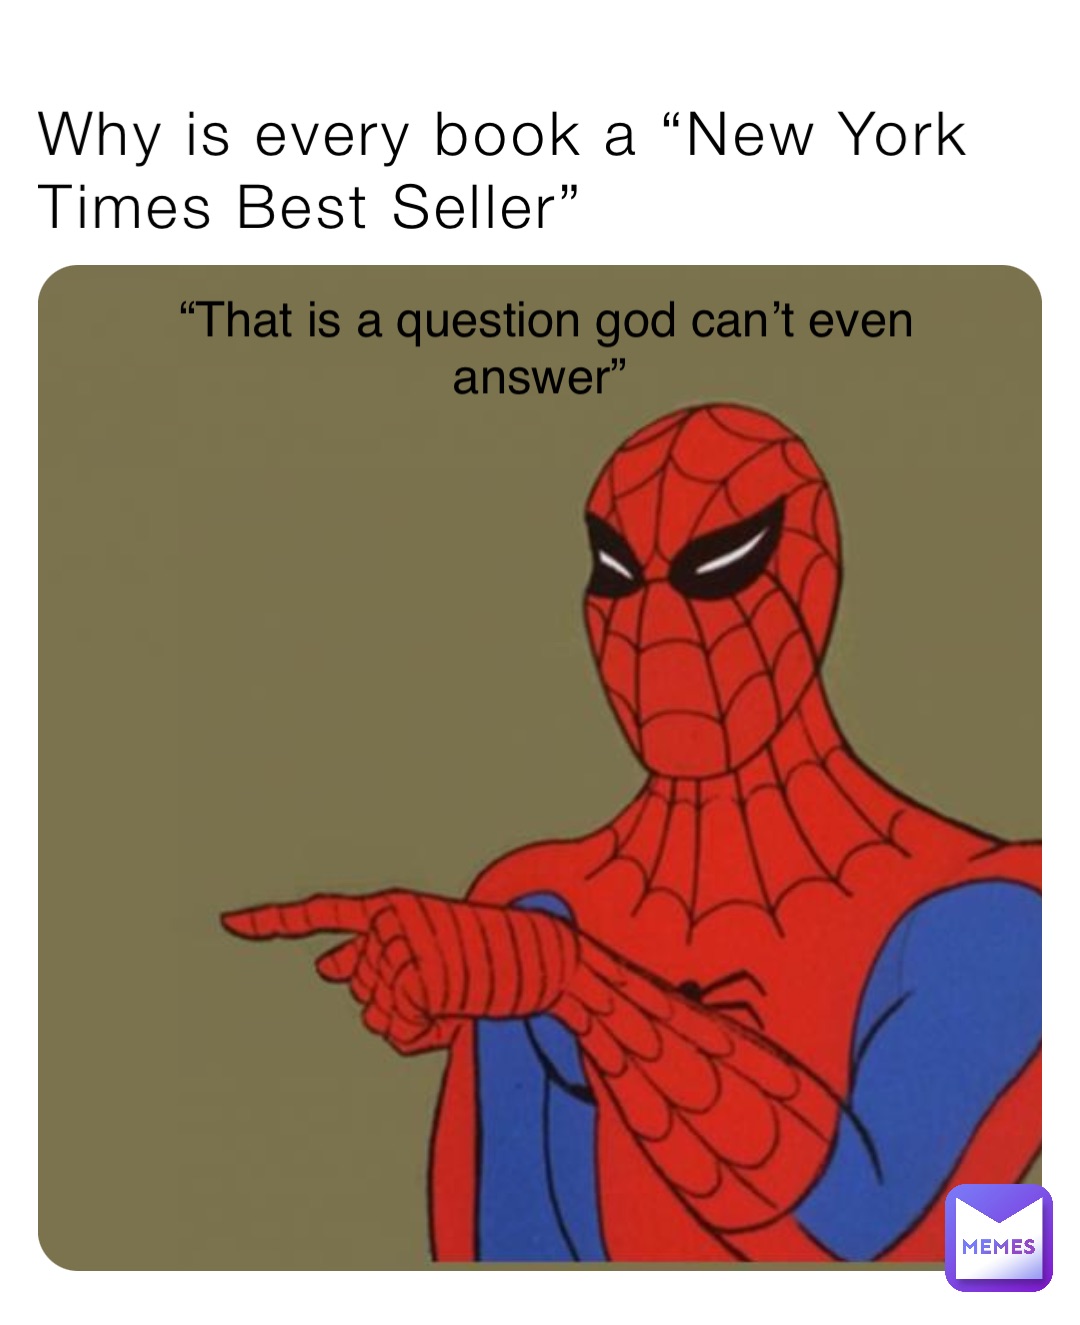 Why is every book a “New York Times Best Seller” “That is a question god can’t even answer”